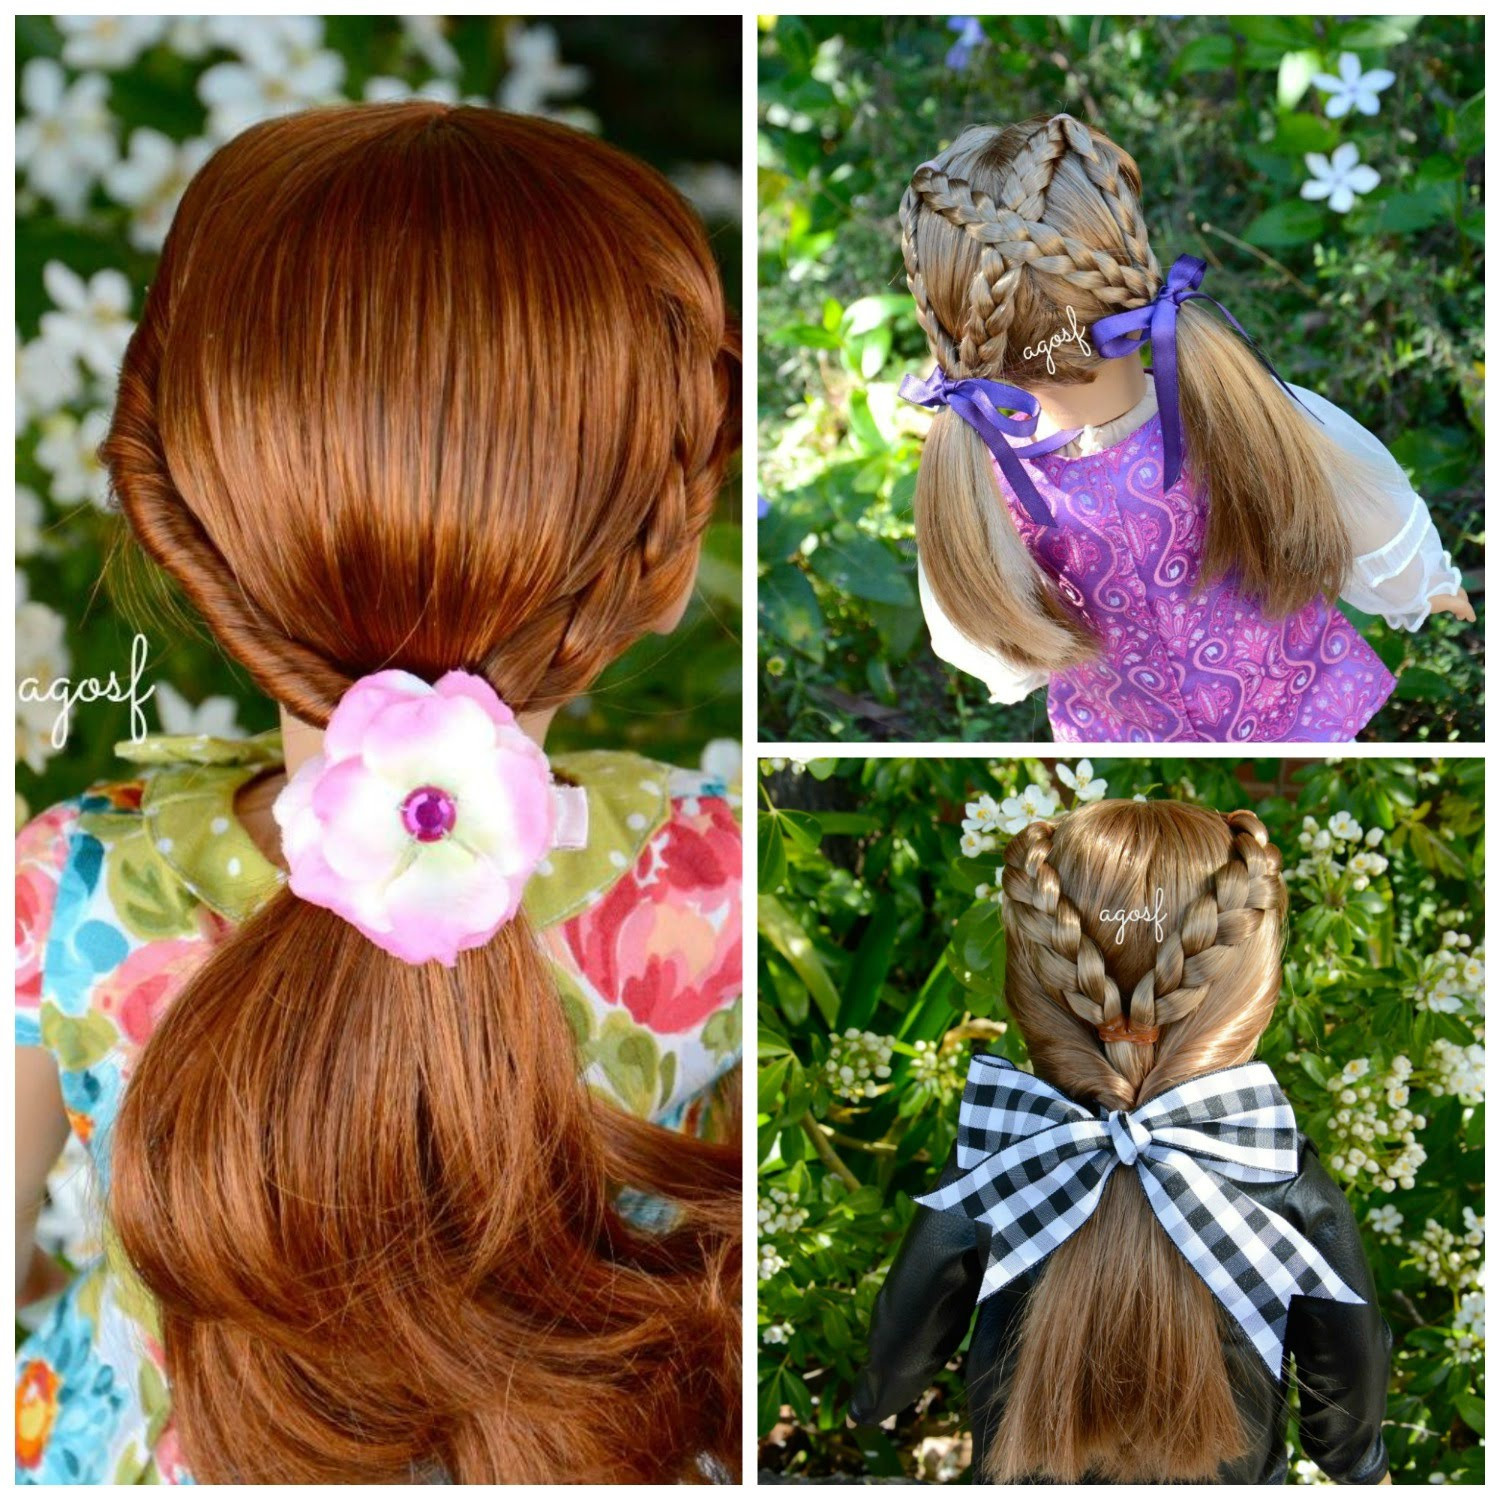 Easy Doll Hairstyles
 Cute American Girl Doll Hairstyles trends hairstyle